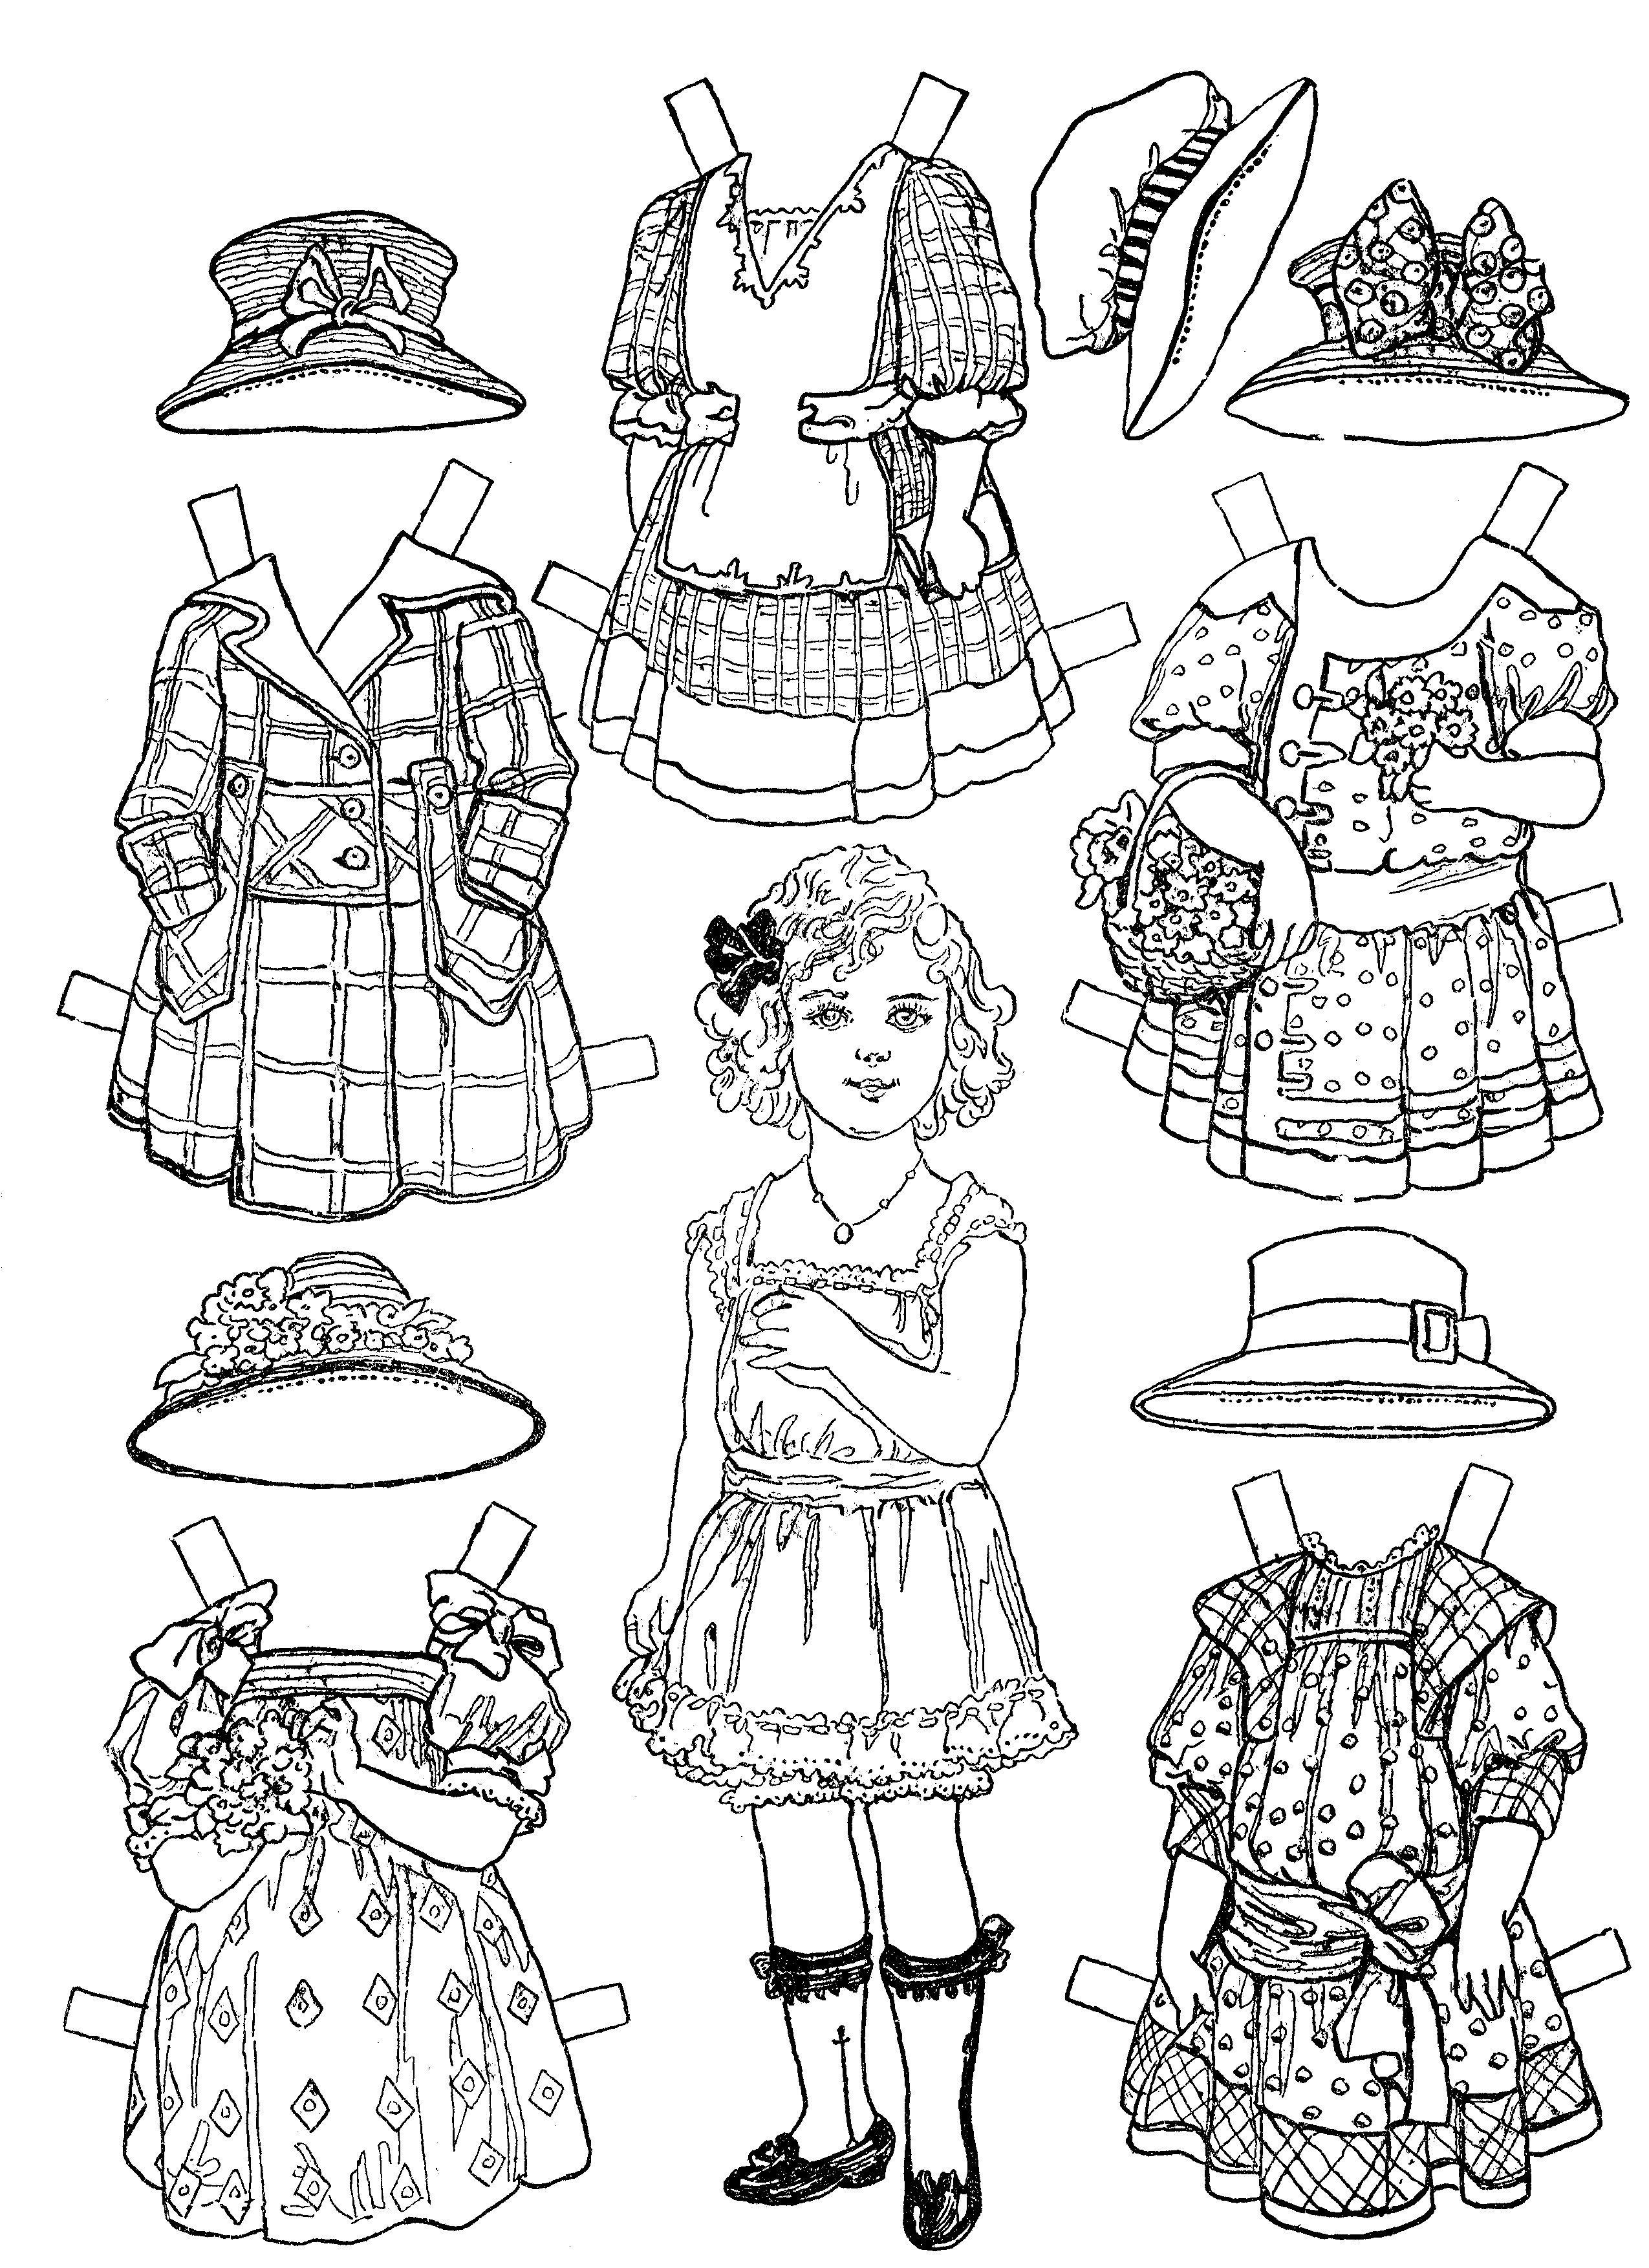 9 Best Images of Free Printable Paper Dolls To Color Black Printable